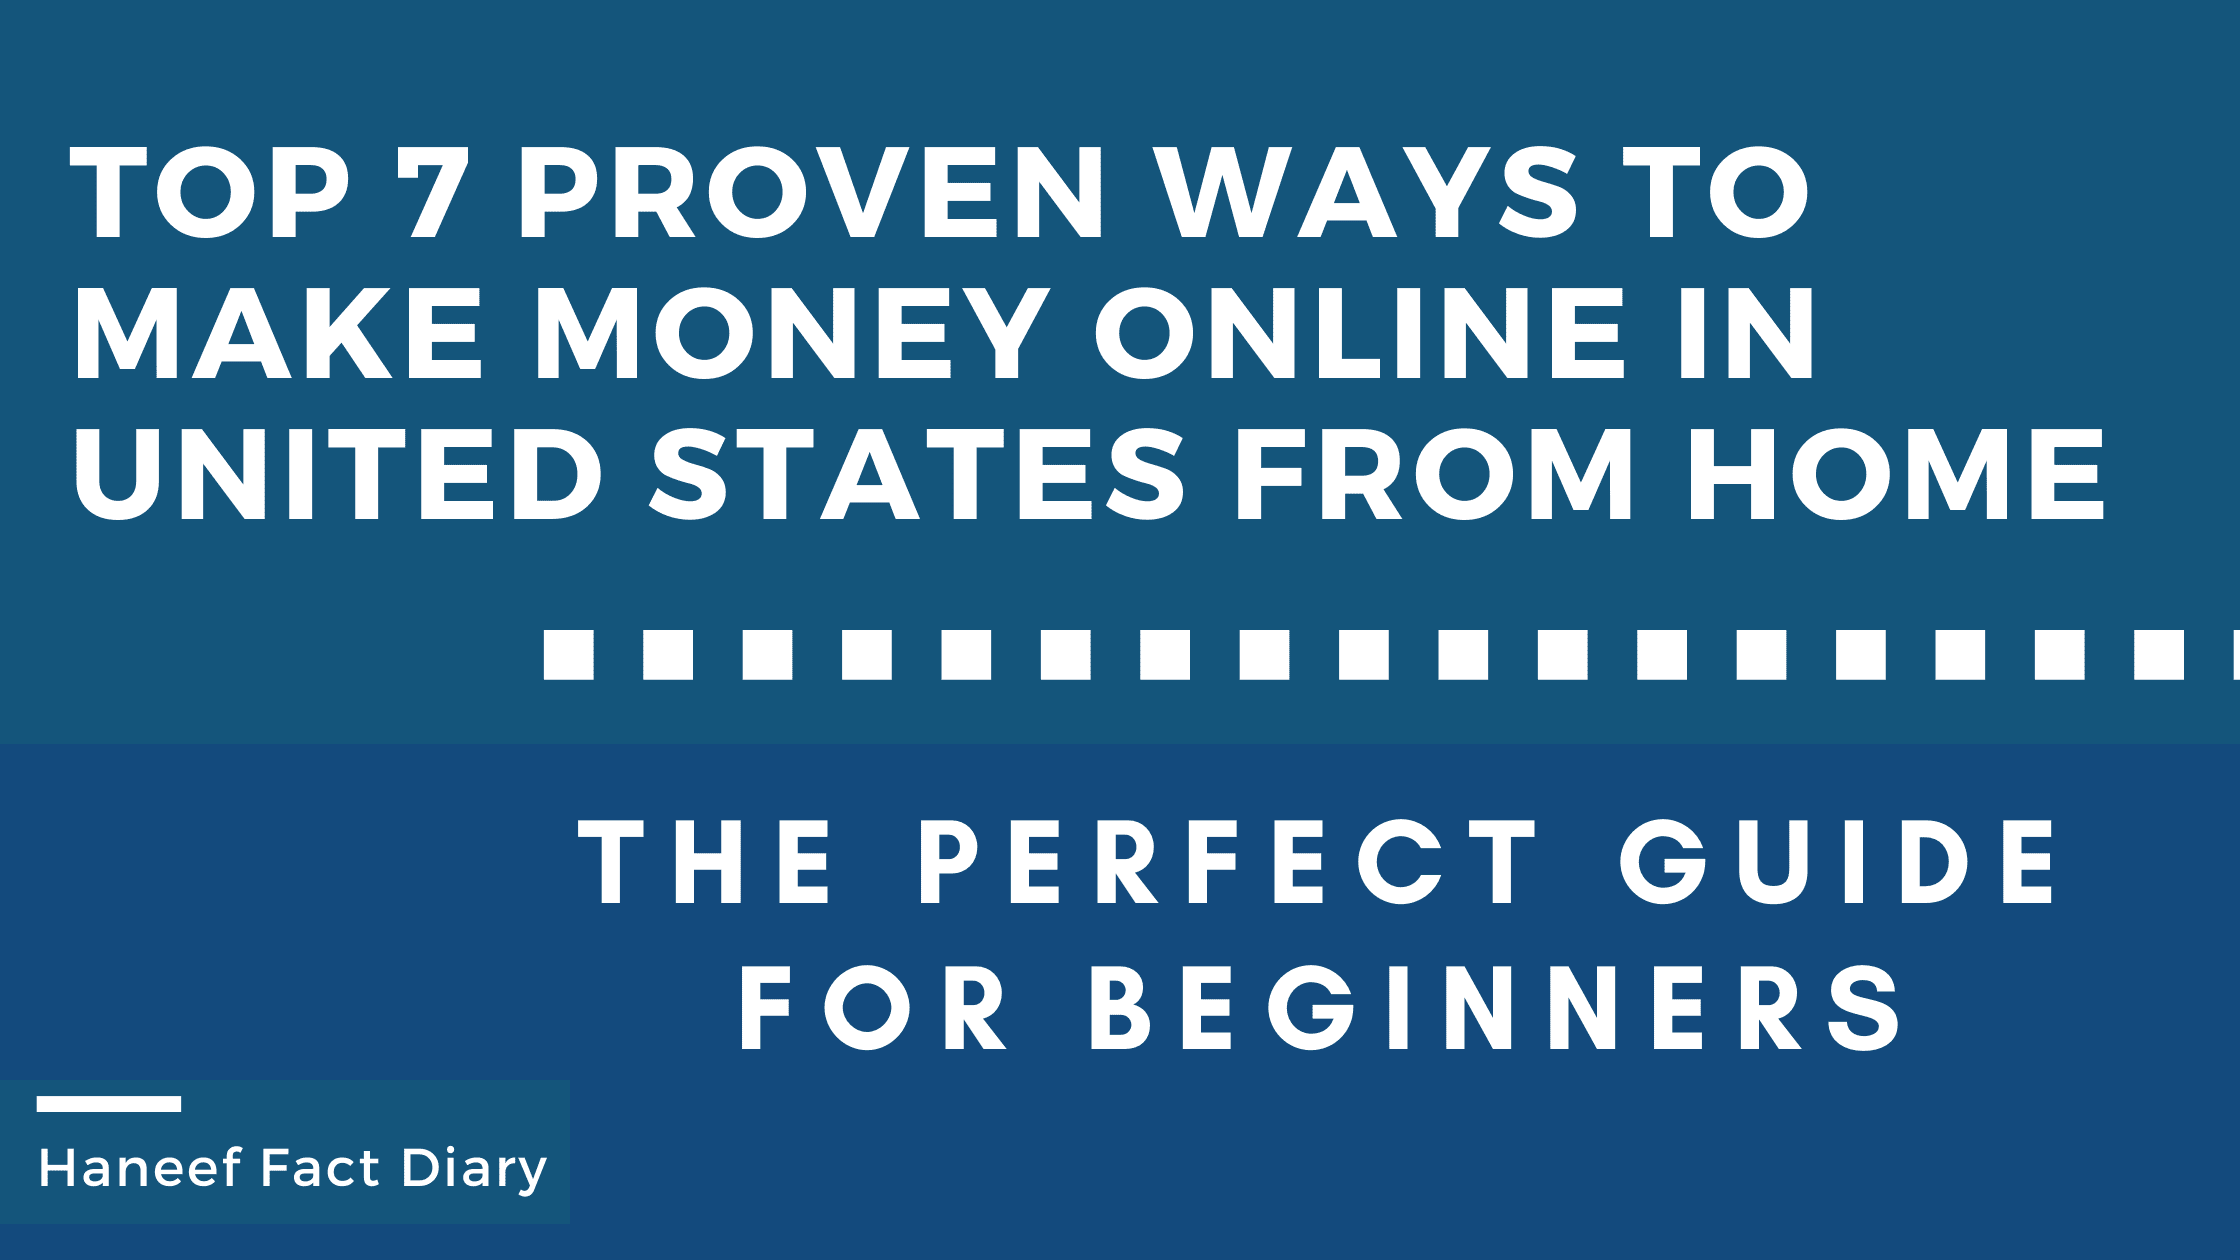 Top 7 Proven Ways to Make Money Online in united states from Home